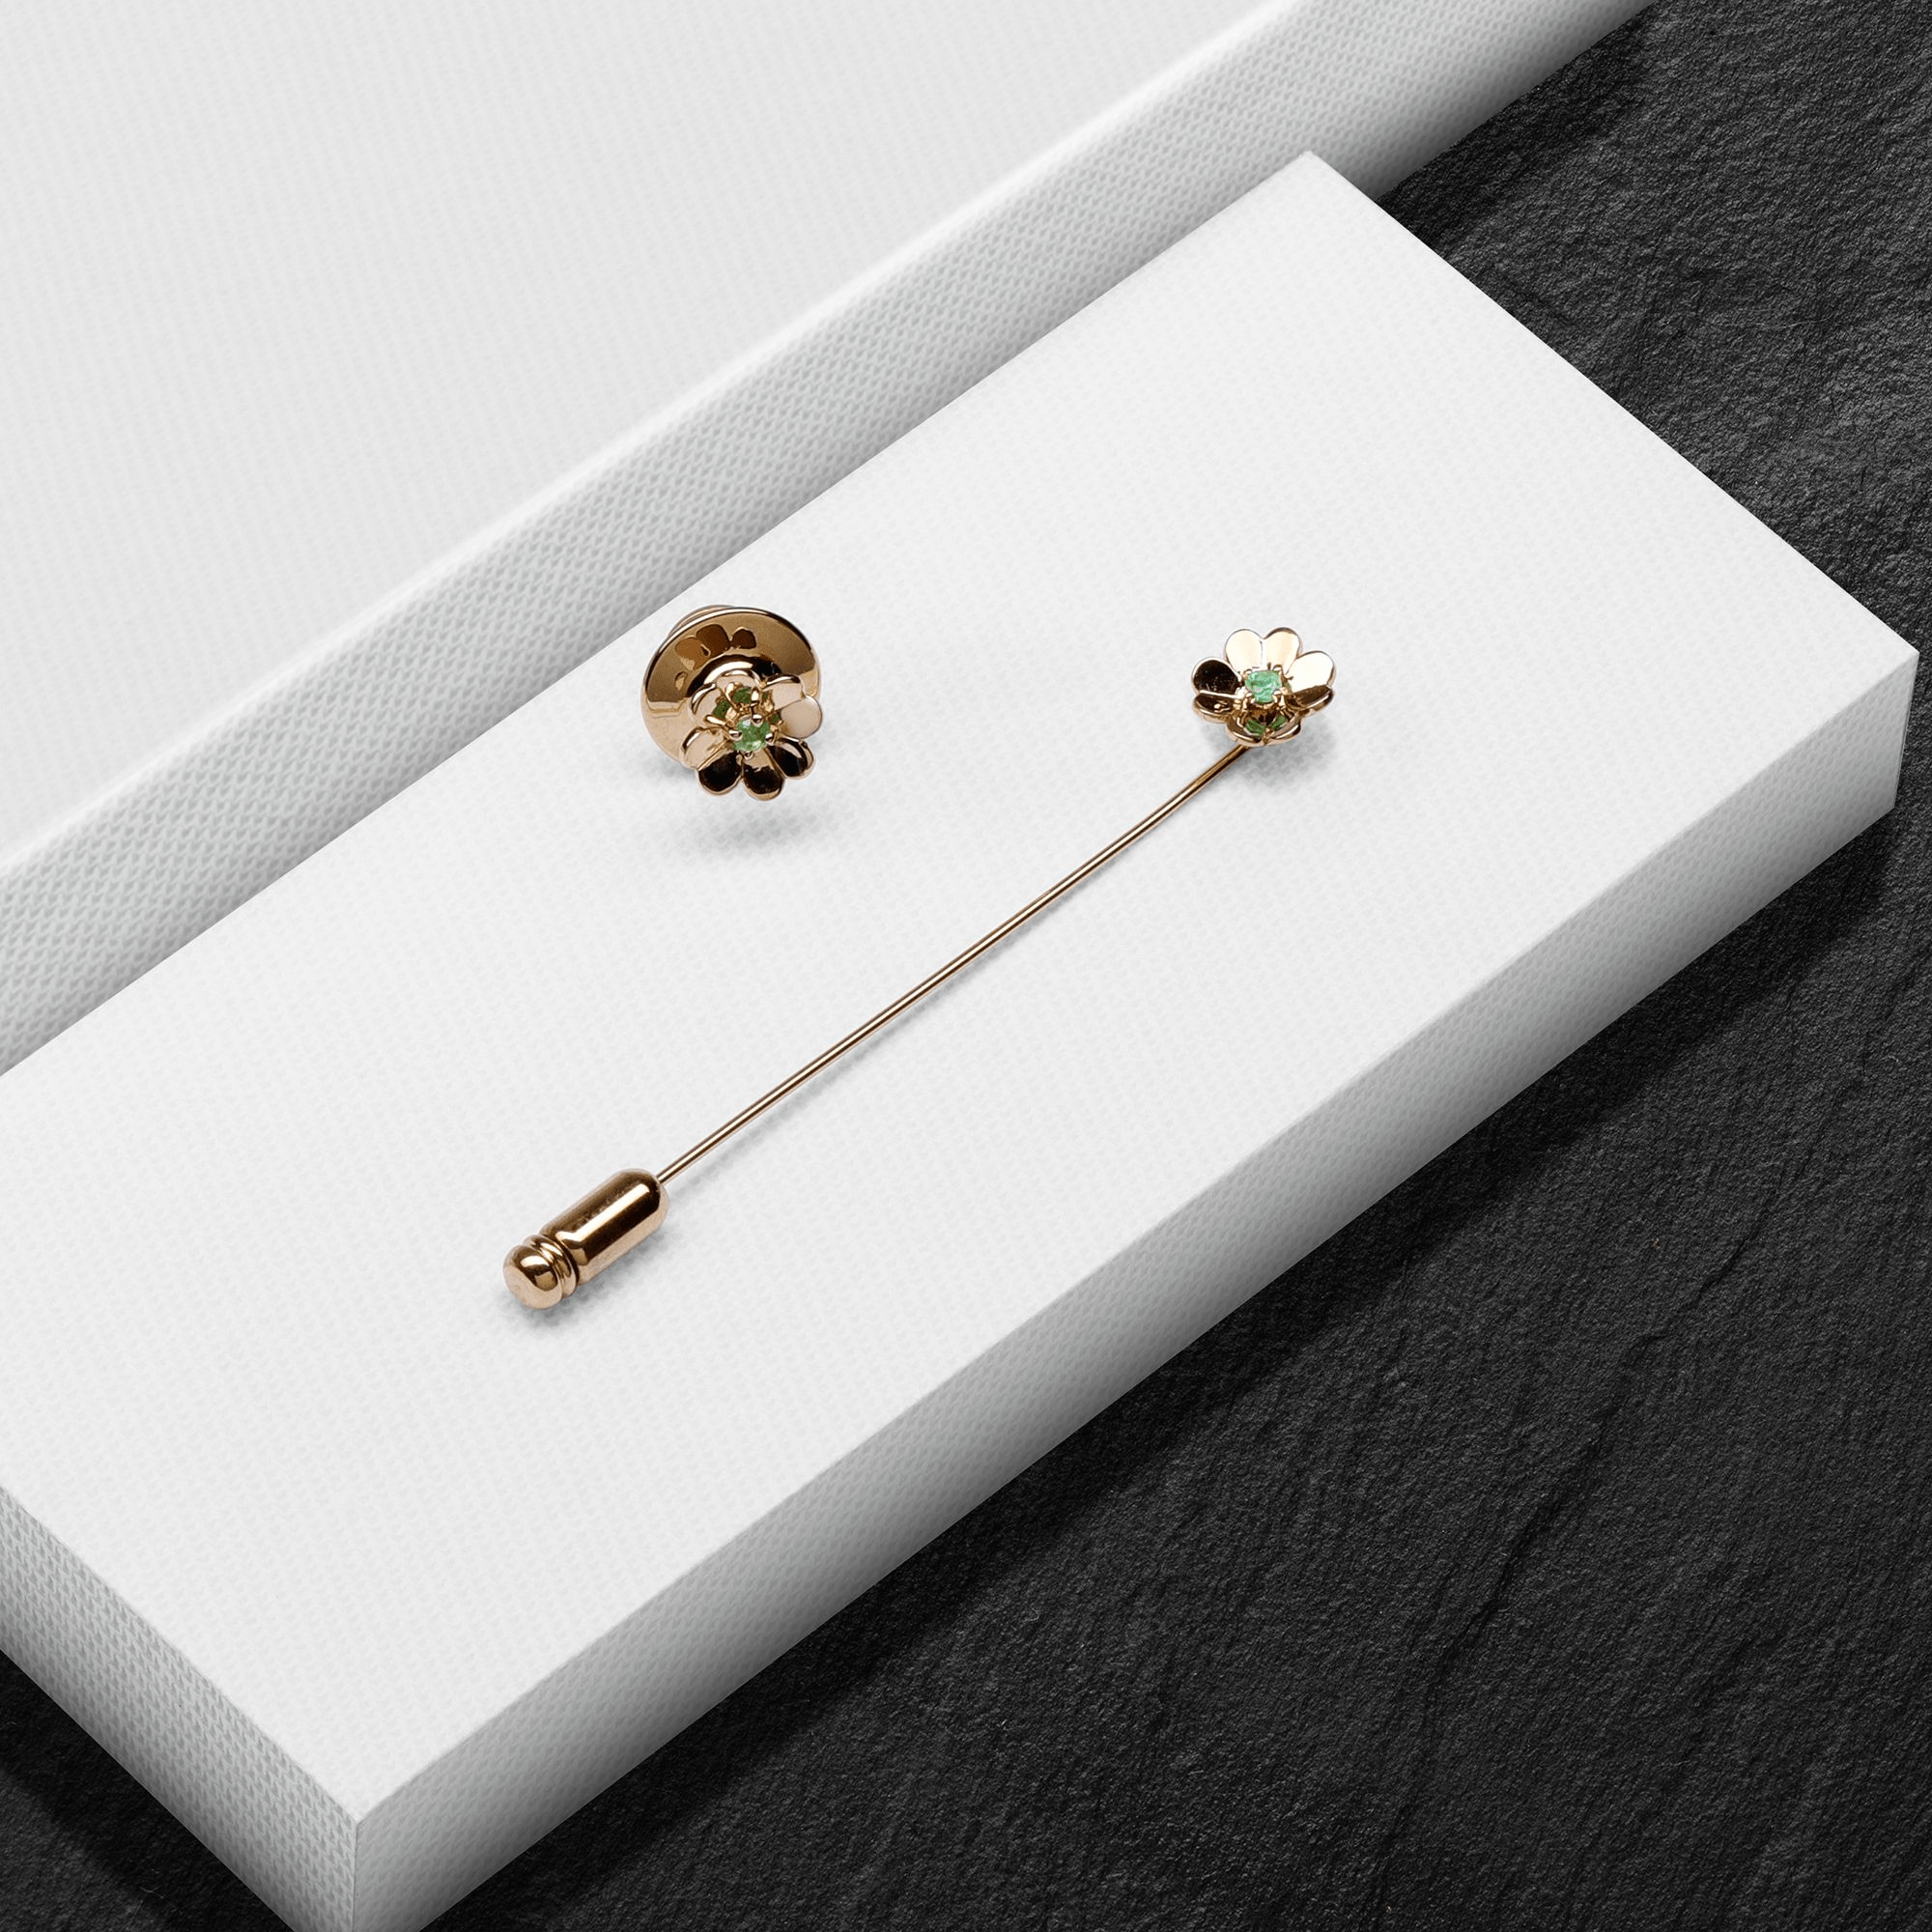 Emerald clover pin and clover lapel pin in 9ct yellow gold